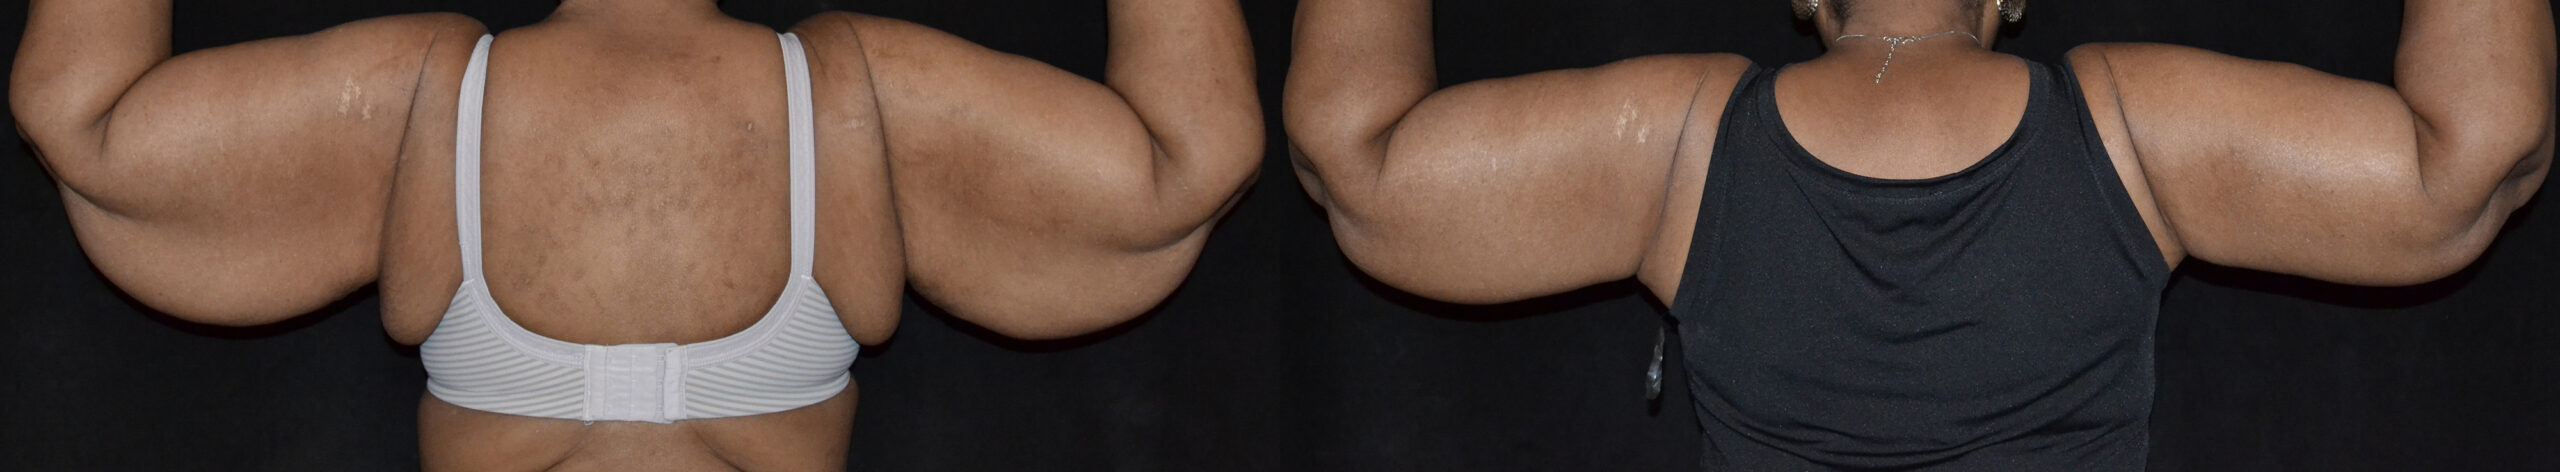 Brachioplasty (Upper Arm Reduction) before and after photo by Dr. William A. Stefani in Troy, MI